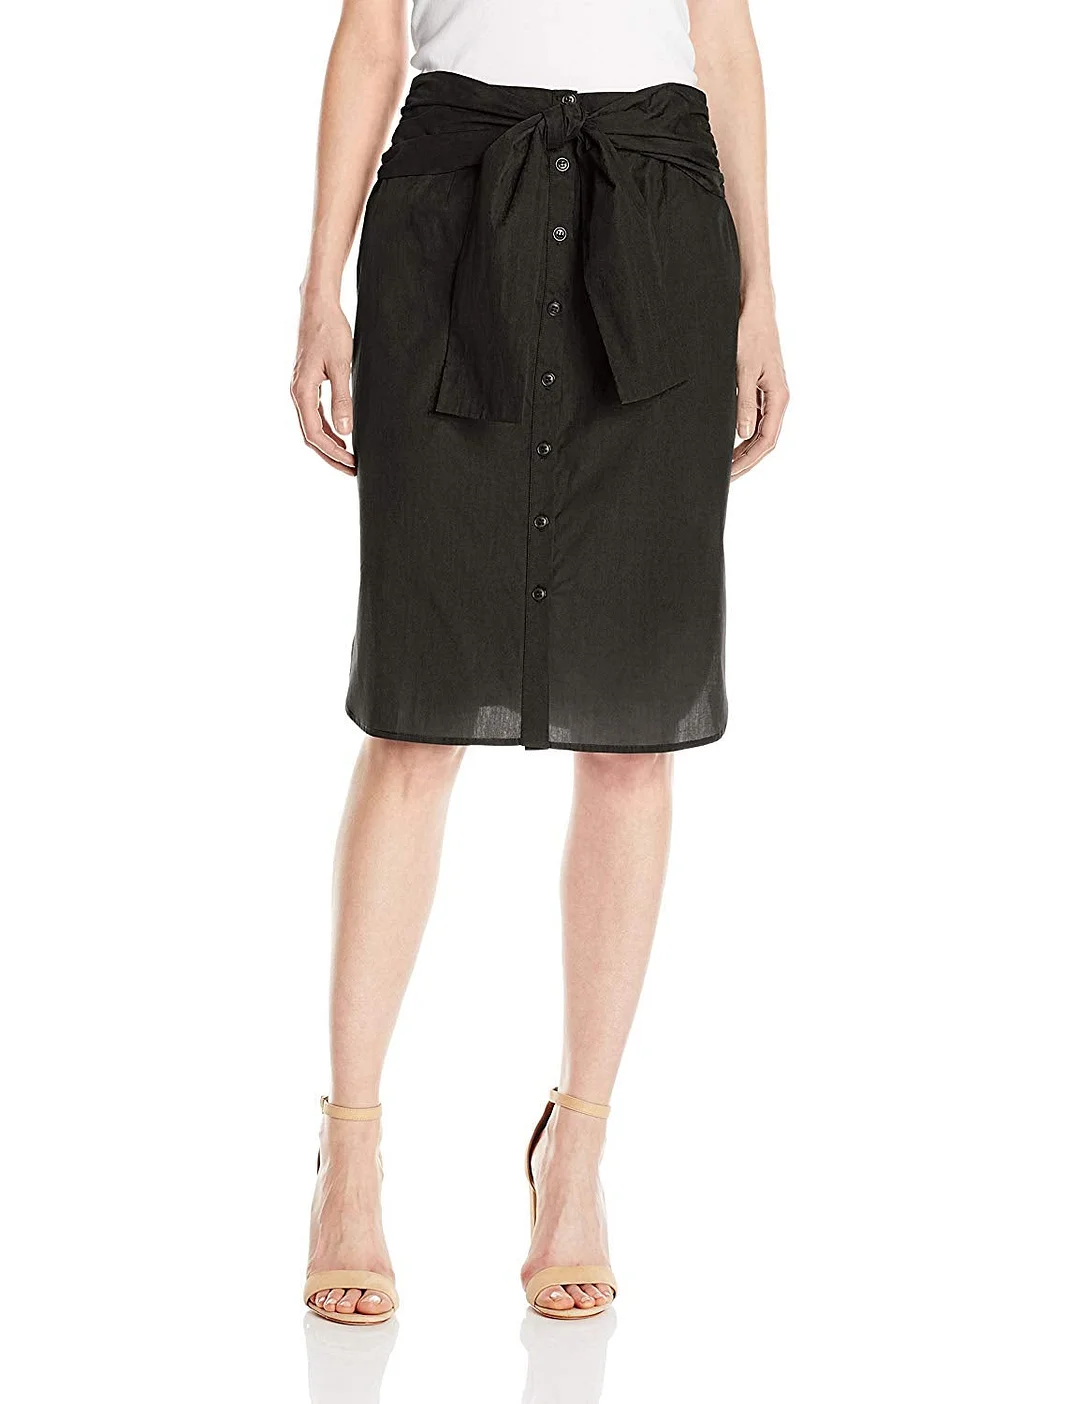 Women's Tie-Front Skirt Straight skirt with athletic notched high/low hem.